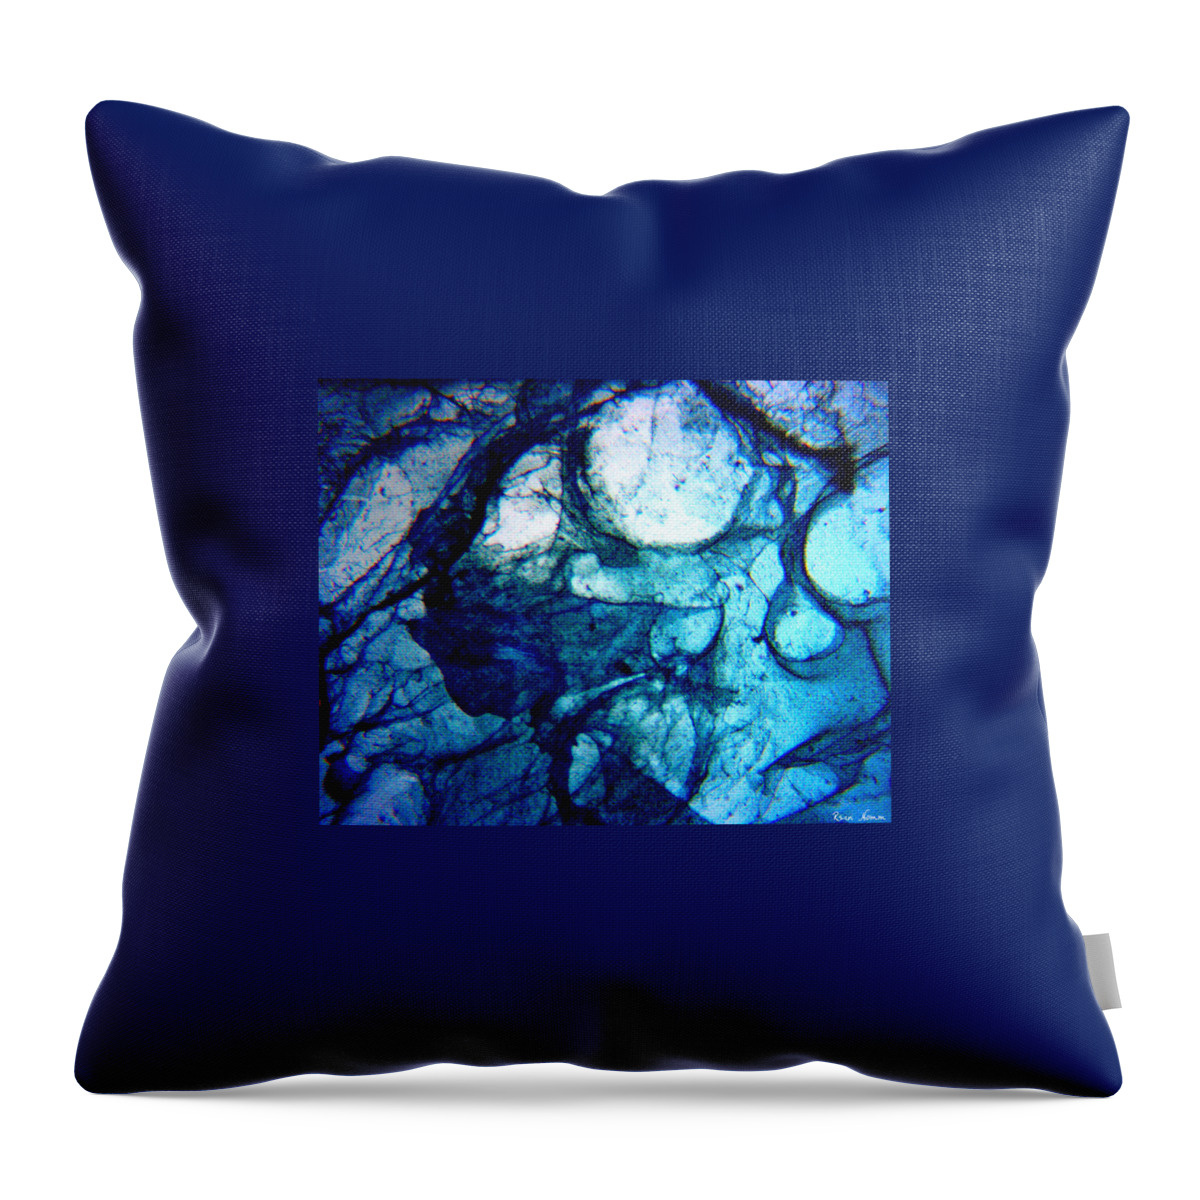  Throw Pillow featuring the photograph Beneath the Ice by Rein Nomm